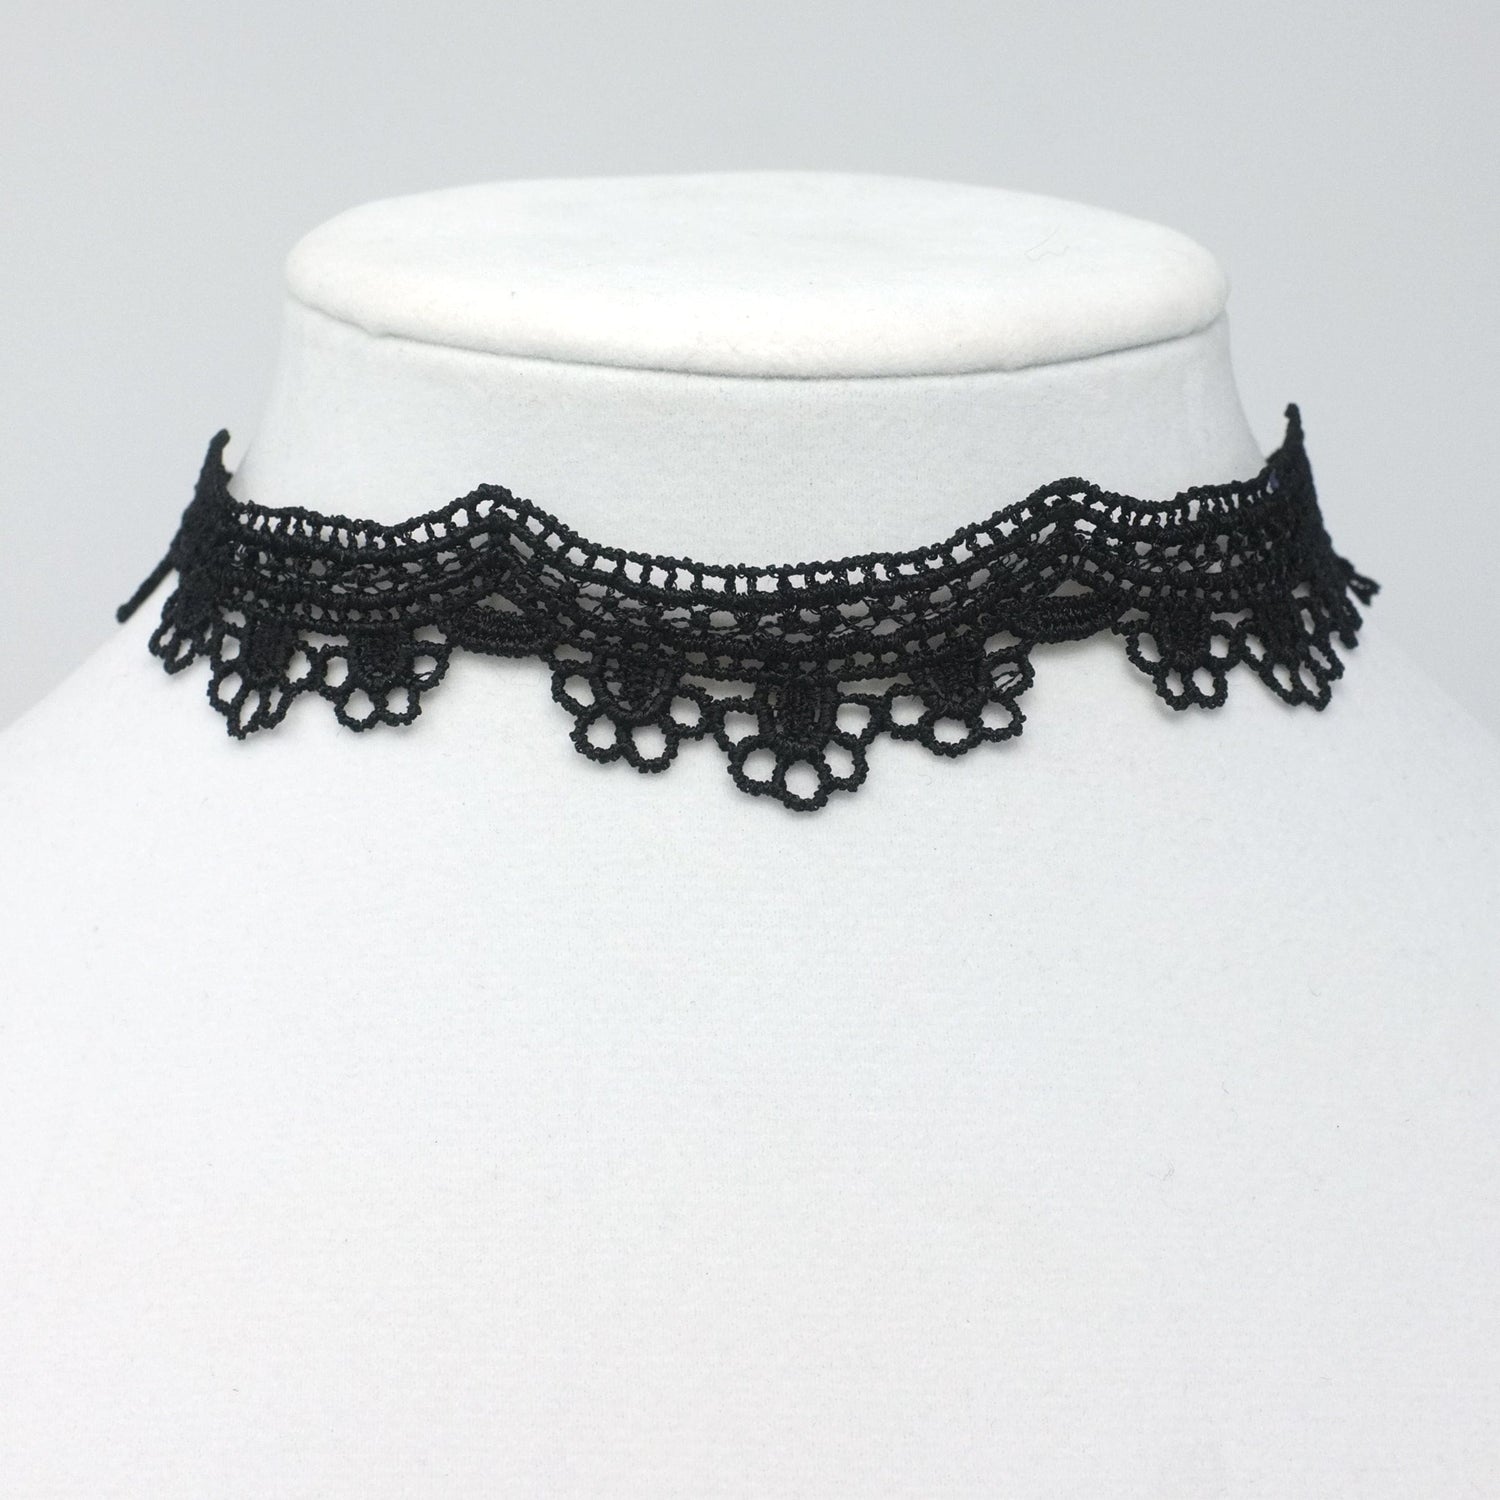 Black Choker made with scalloped edge lace